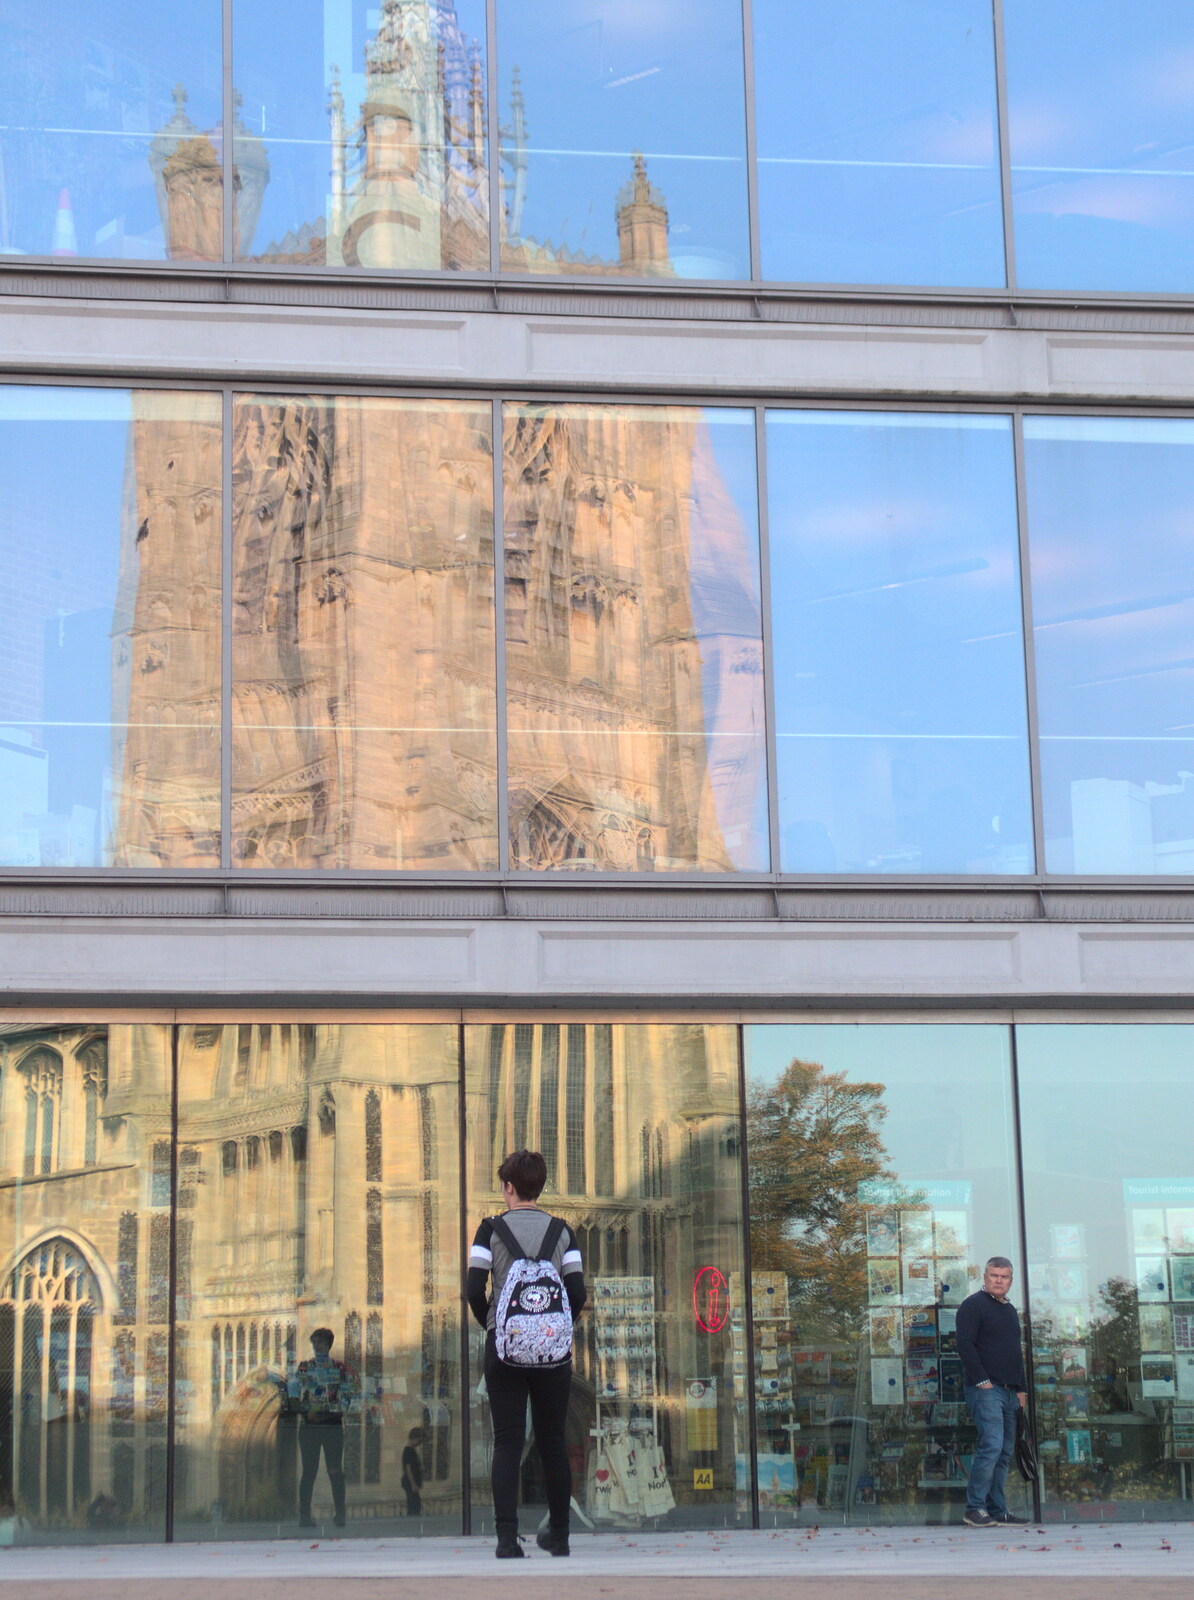 St. Peter Mancroft reflected in the Forum from Trafalgar Day and Pizza, Norwich, Norfolk - 15th October 2017